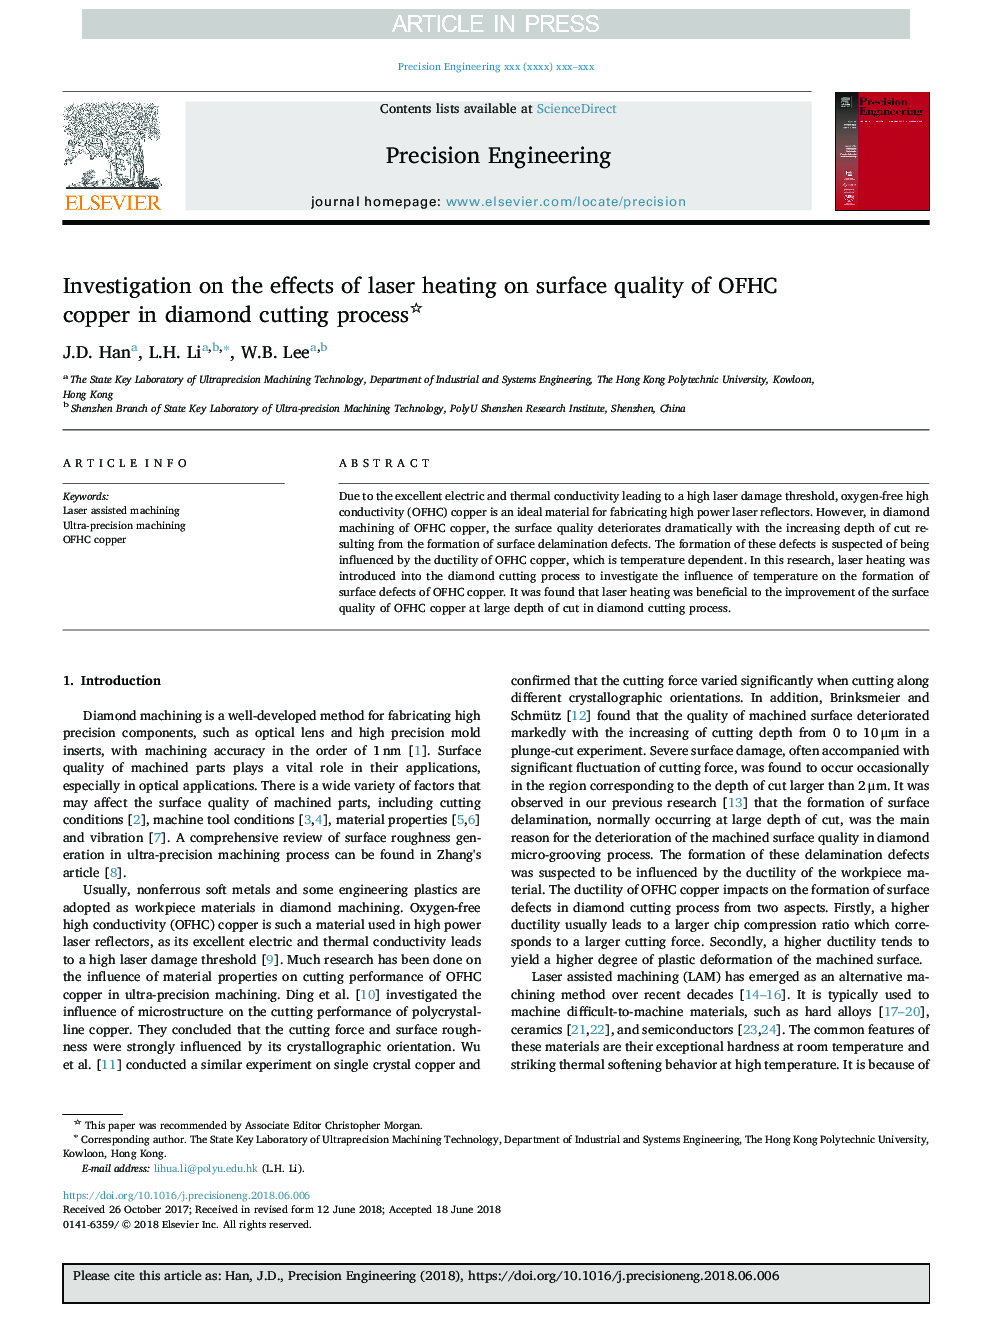 Investigation on the effects of laser heating on surface quality of OFHC copper in diamond cutting process